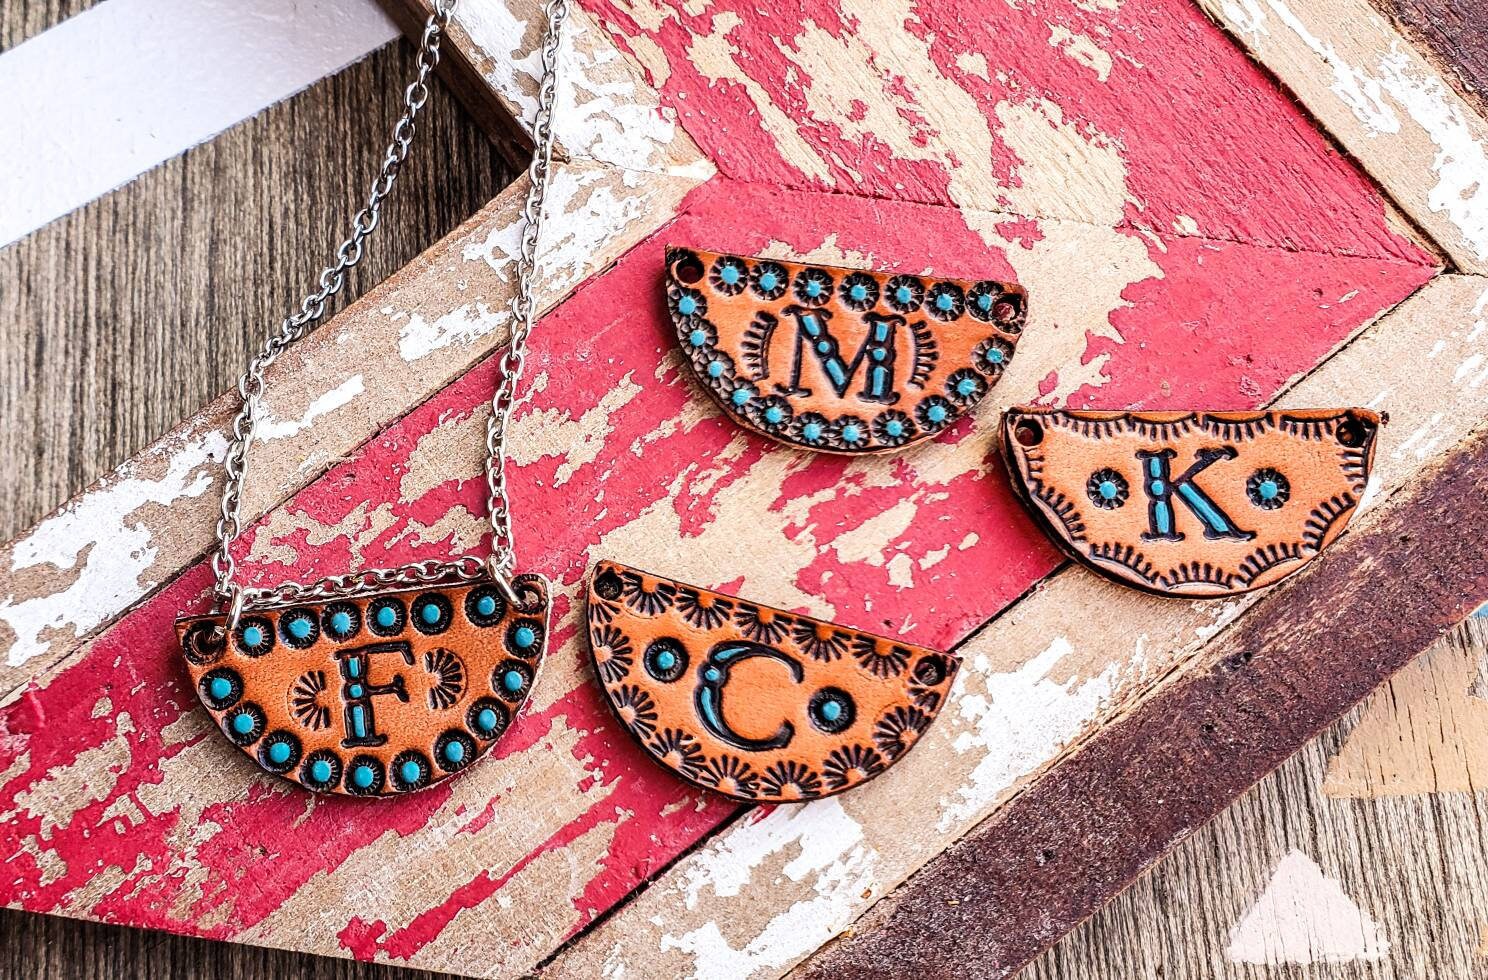 Punchy Cactus Boutique & Western Wear Tooled Leather Keychain | Punchy Cactus | Western